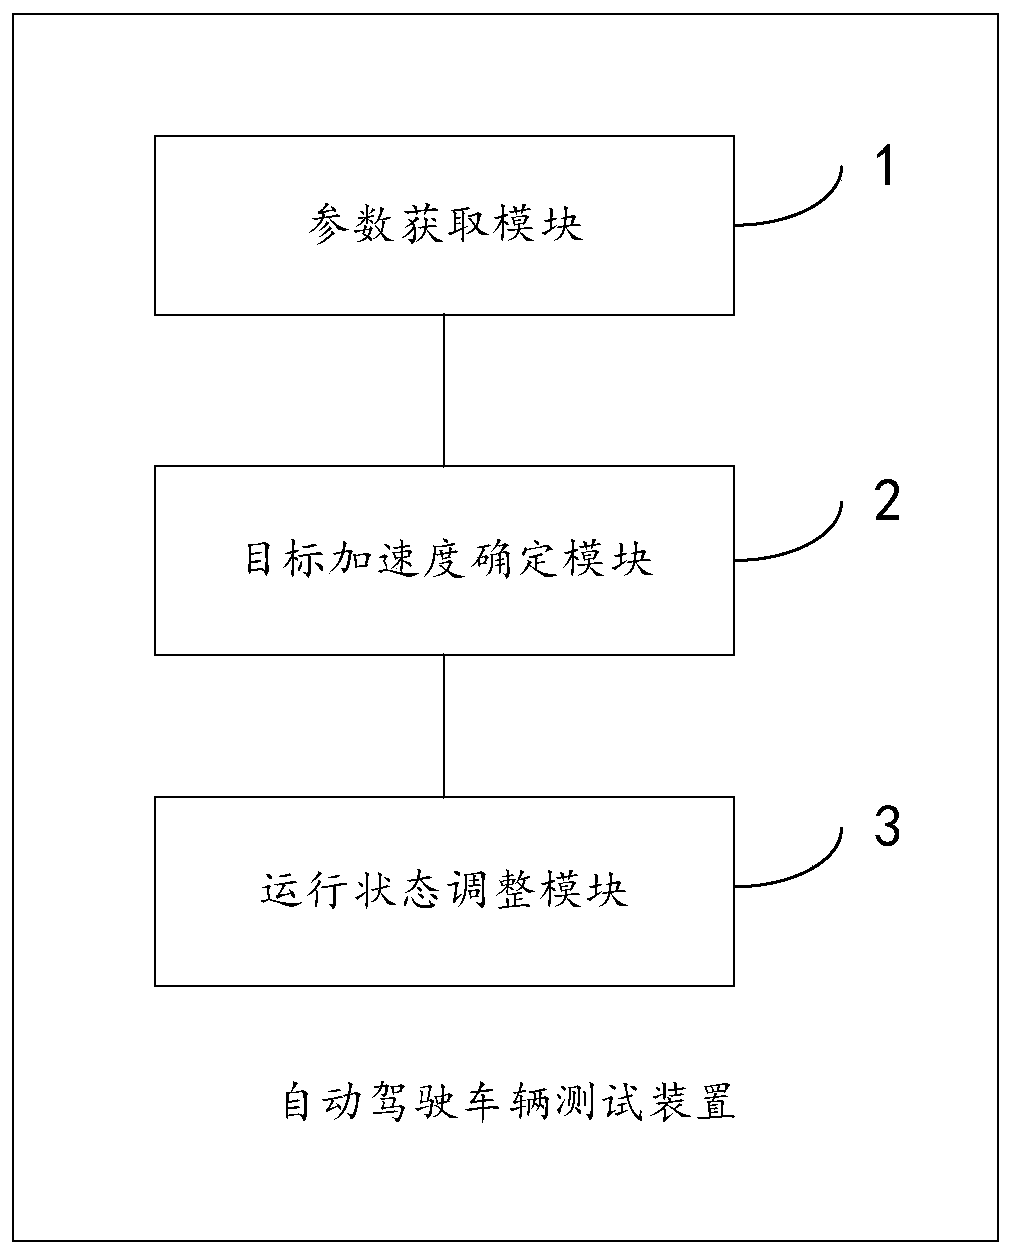 Automatic driving vehicle test method and device, controller and medium